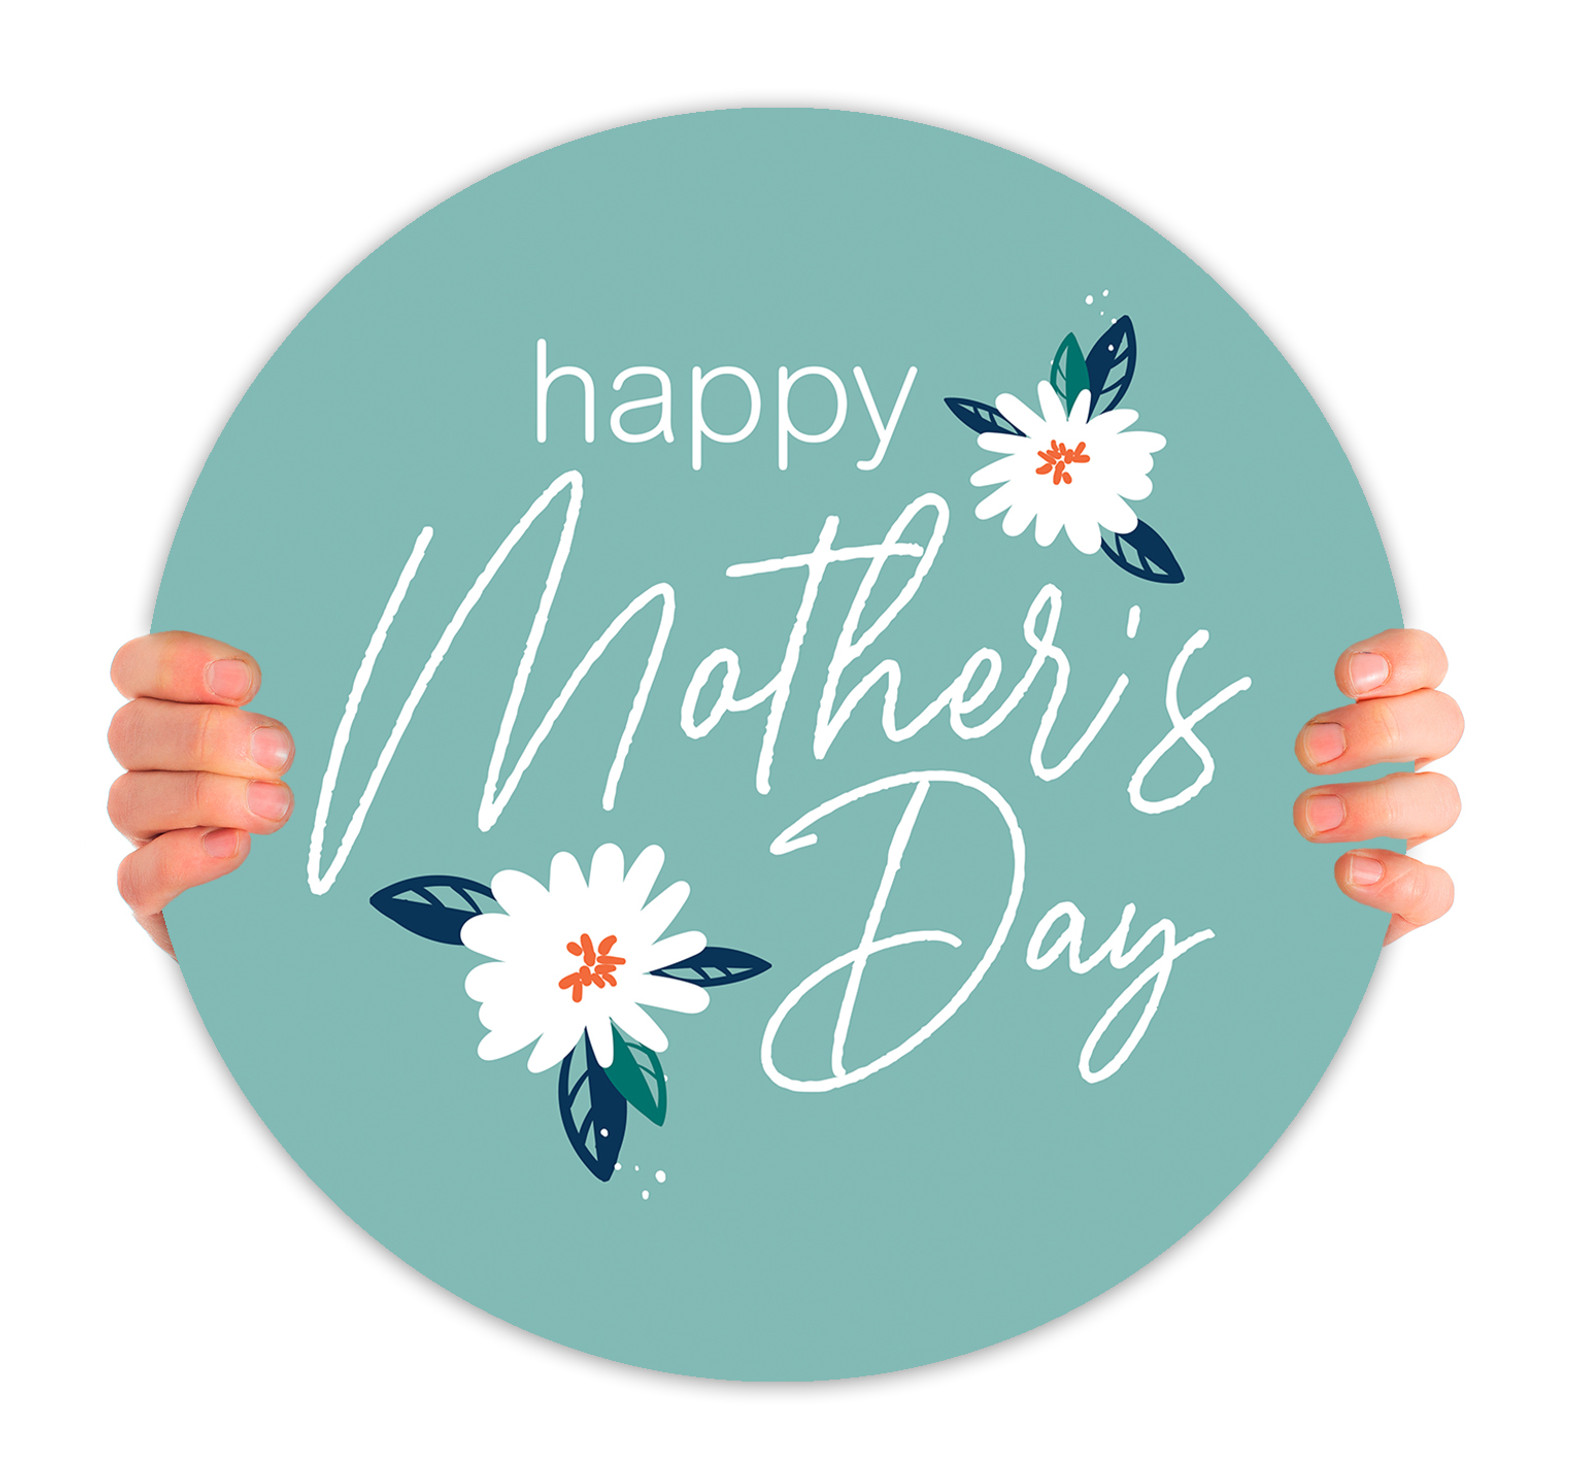 Happy Mother's Day from the Health Department, Department of Public Health